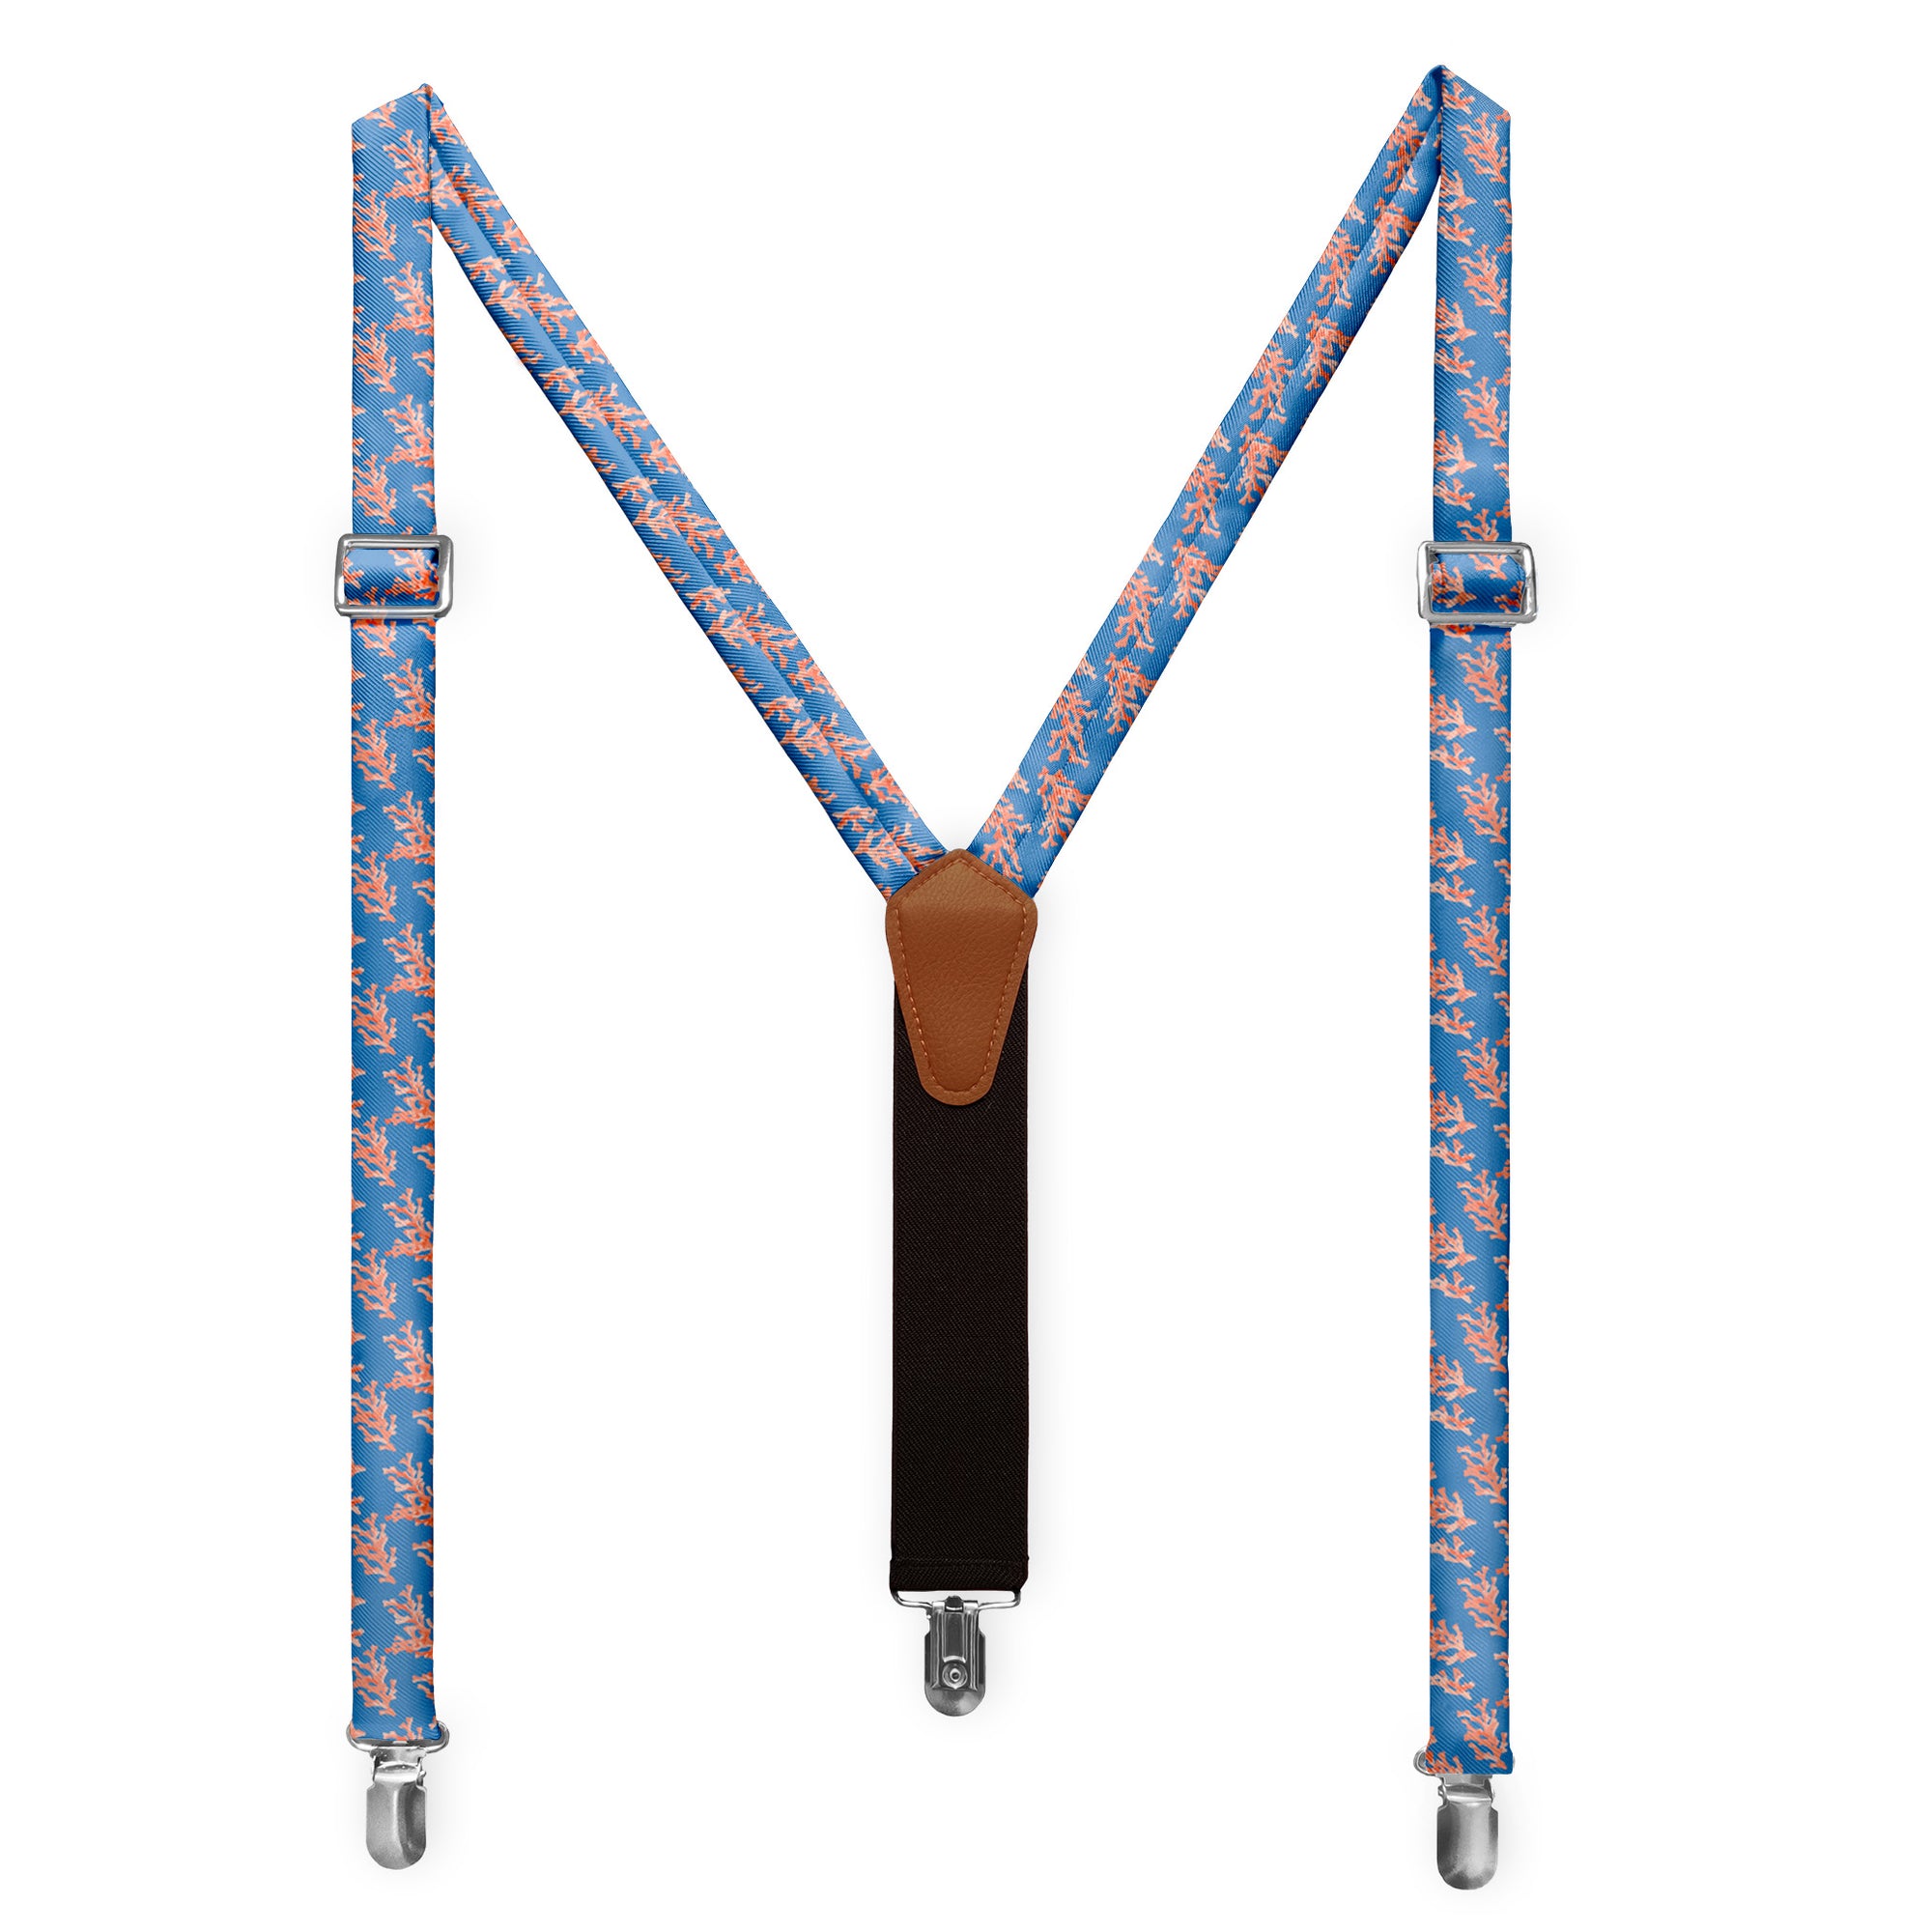 Coral Reef Suspenders - Adult Short 36-40" -  - Knotty Tie Co.